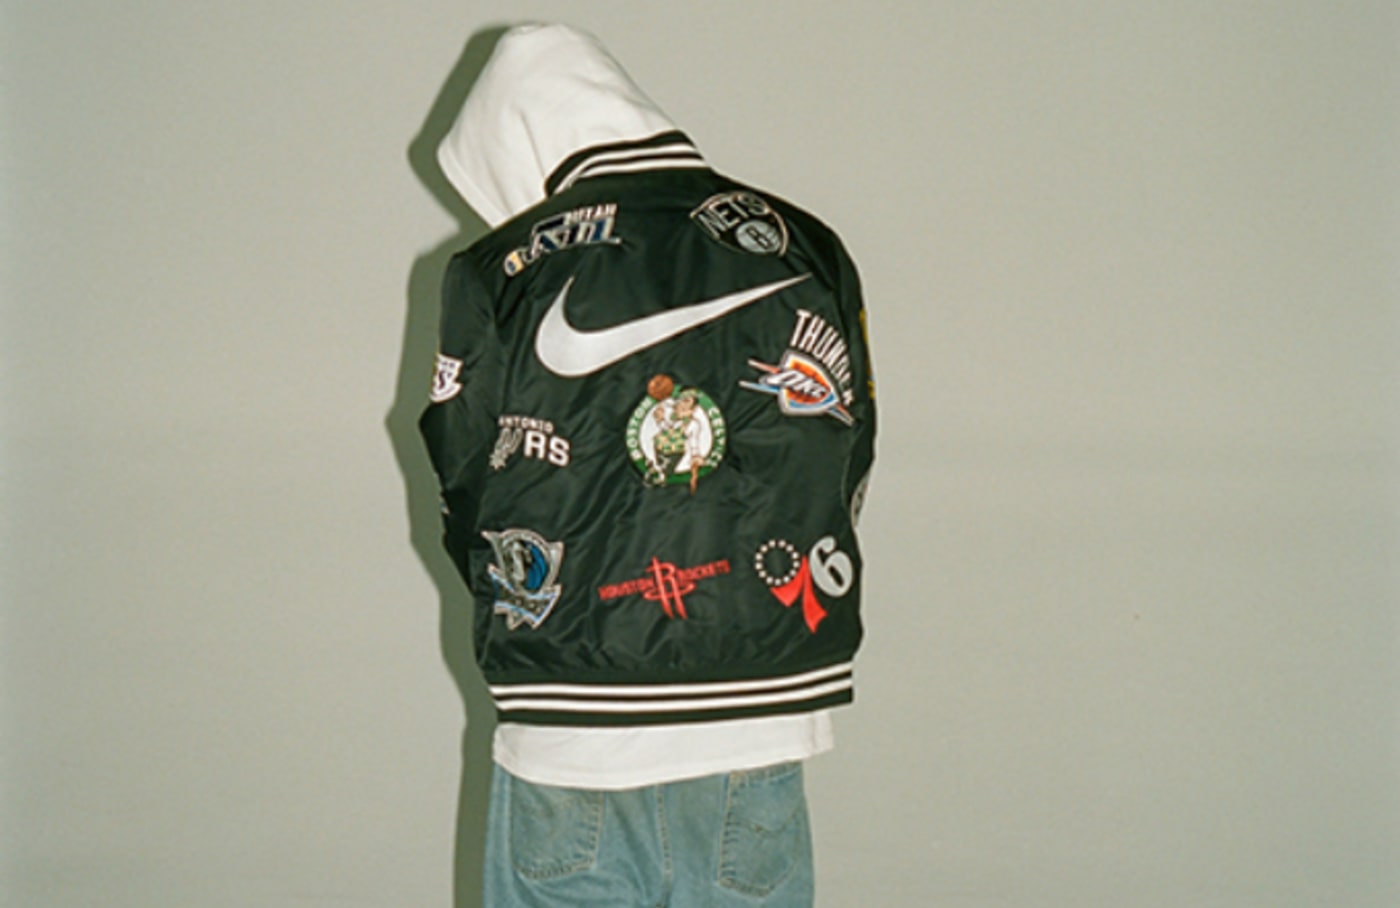 Supreme Reveals Nike x NBA Collection Featuring Jerseys, Jackets, and